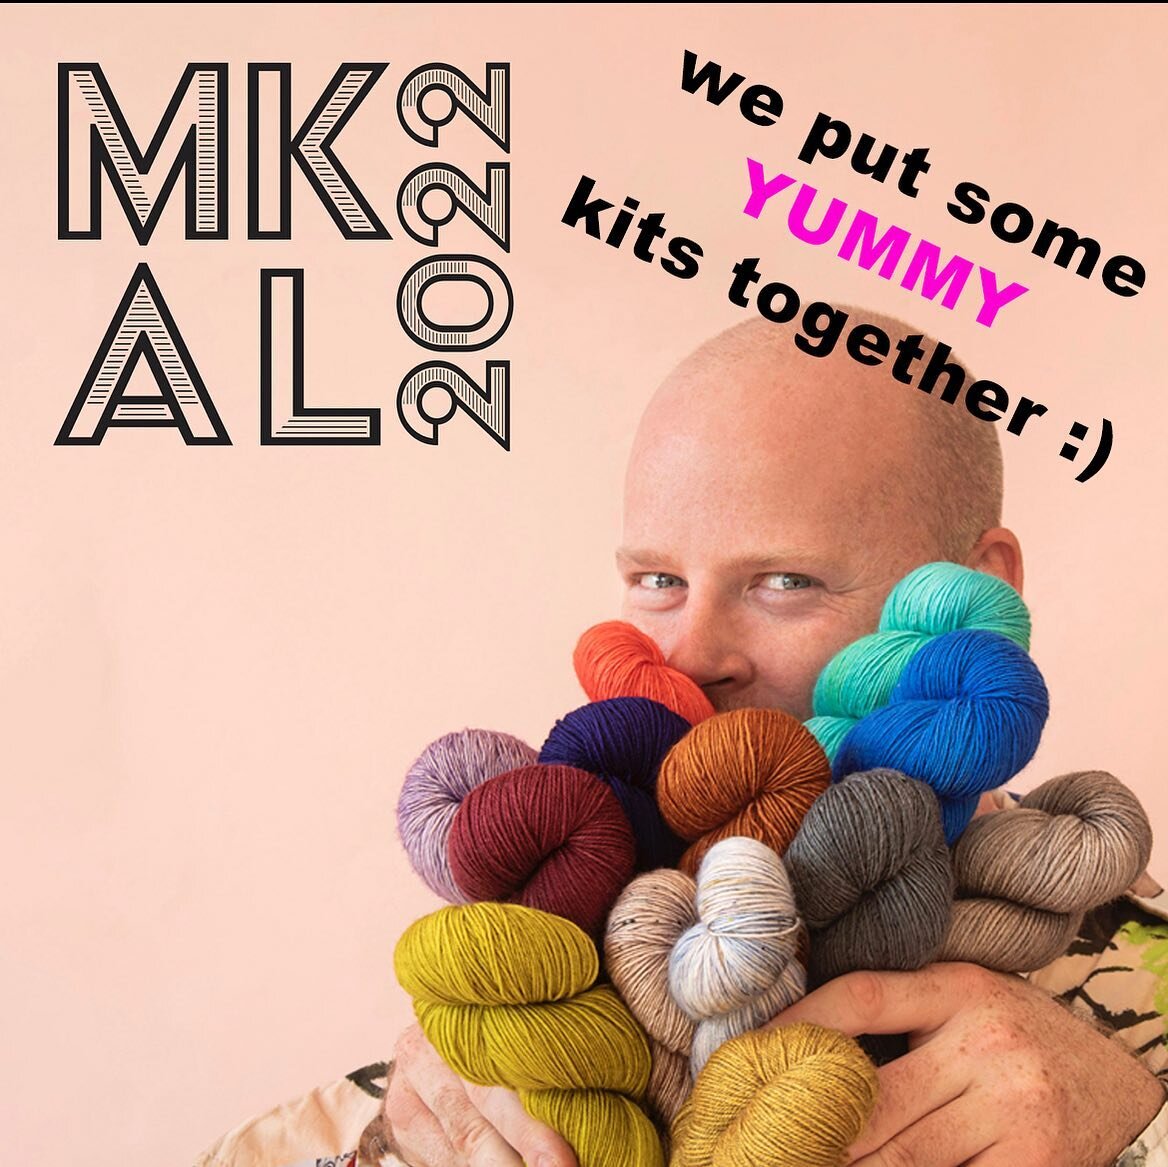 We have 2 days left of Miss Babs trunk show in the house. Soooo we took his clues and put together a few kits for Westknits MKAL 2022 - Twist &amp; Turns using Yummy 2-ply. Come in or give us a ring if you see something you like! 

#westknitmkal2022 